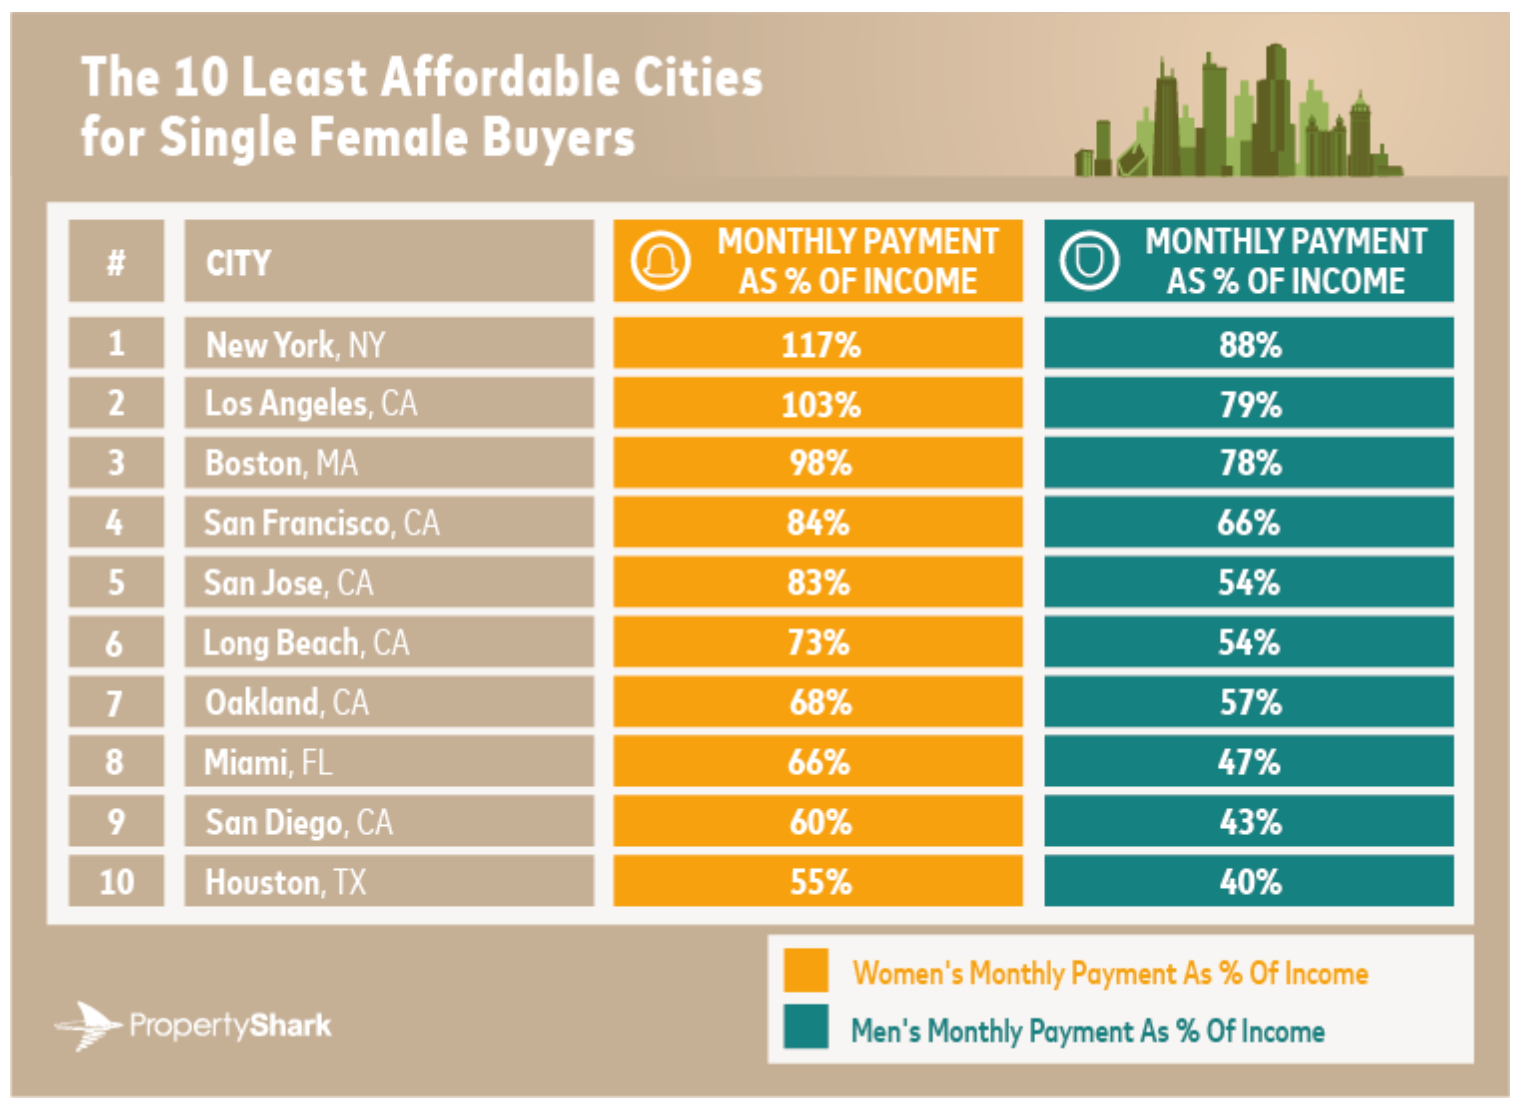 A graphic list showing the top 10 least affordable cities for single female buyers.